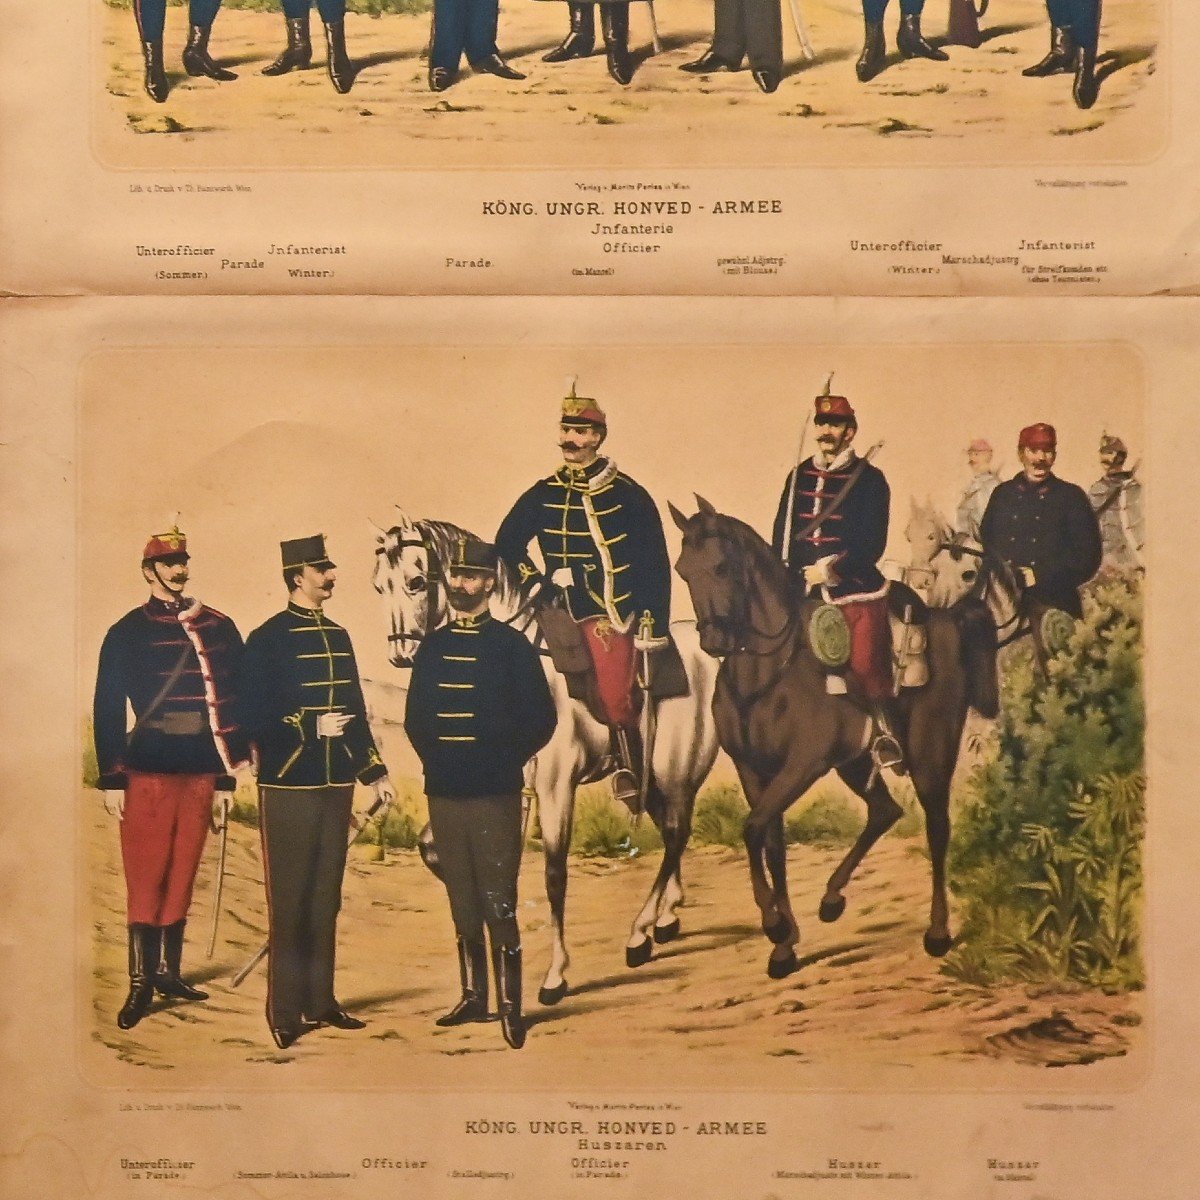 The Military Uniforms, Color Lithographic Prints, Early 1900s-photo-2